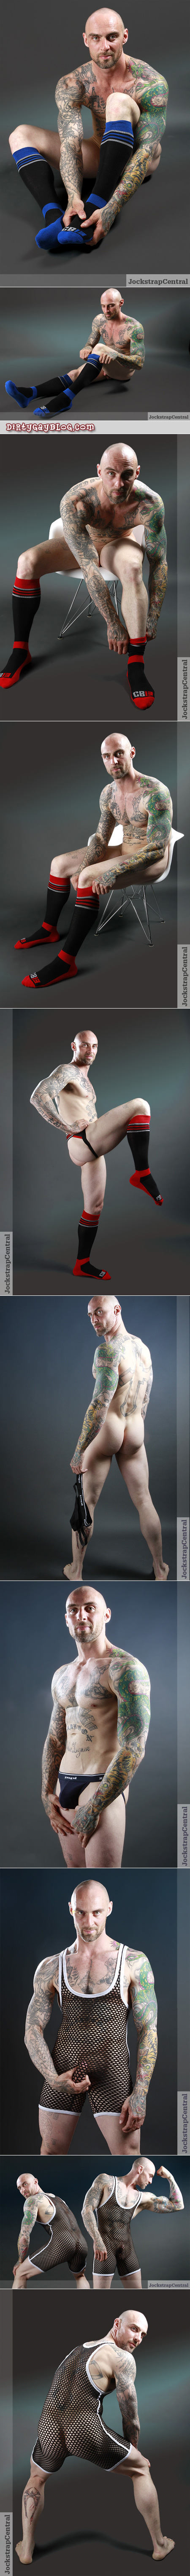 Muscular man with a shaved head and lots of tattoos modeling new and unusual jockstraps, underwear and OTC athletic socks.